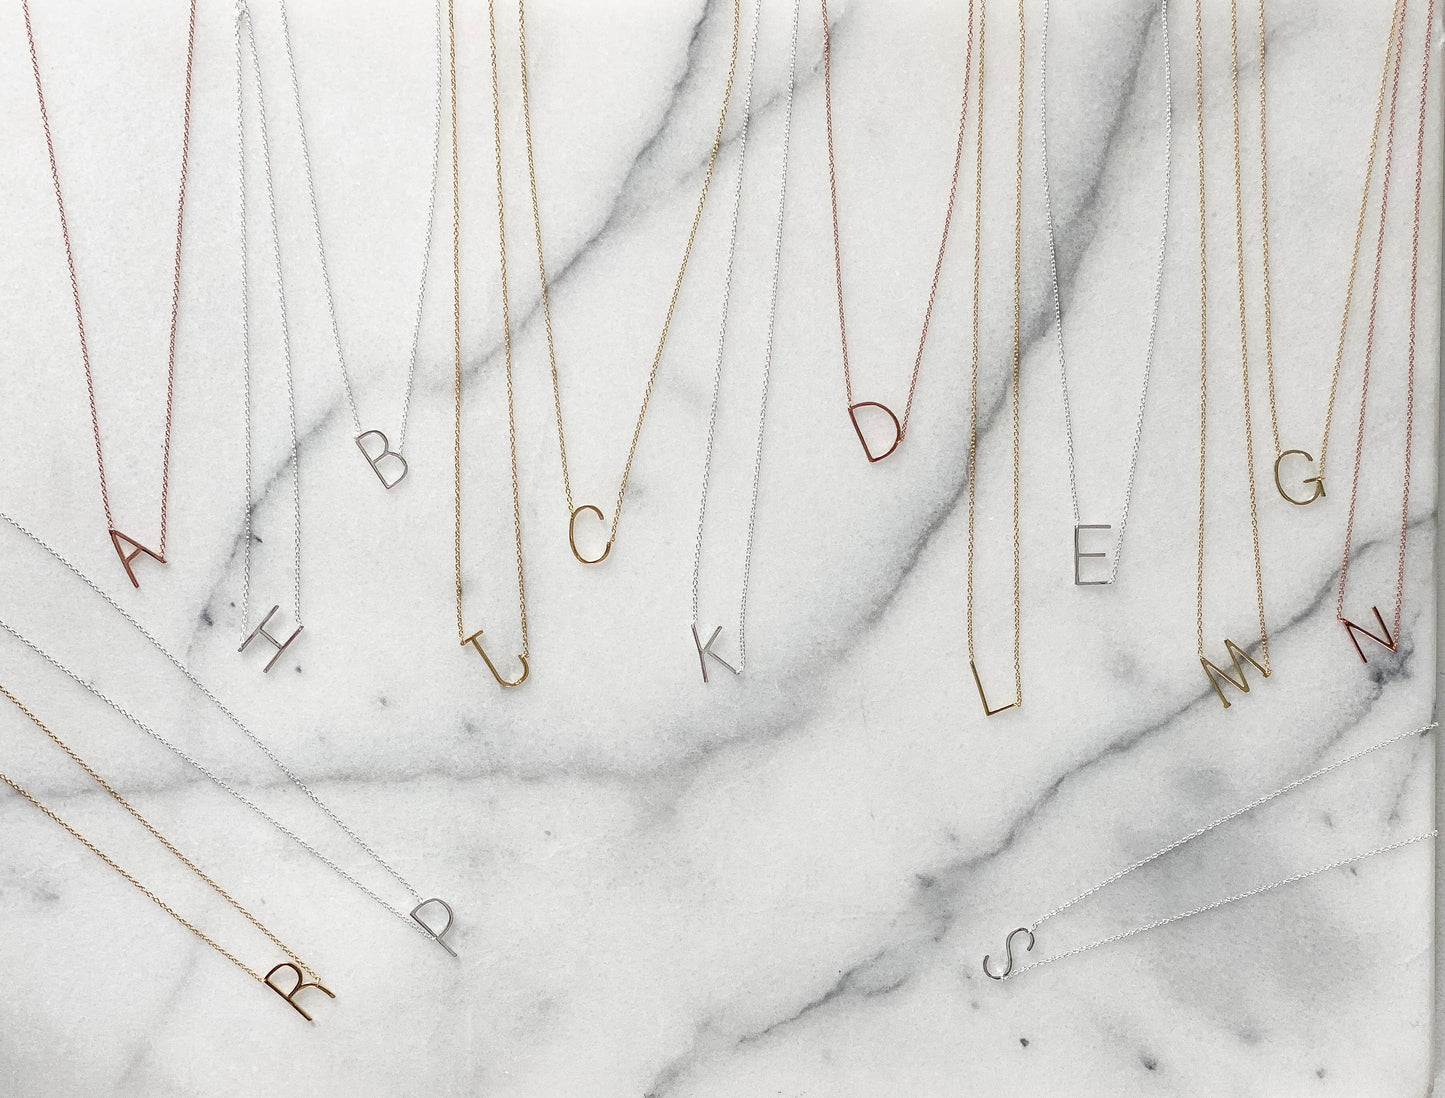 best selling, initial necklaces in rose gold, silver and gold - Alexandra Marks Jewelry